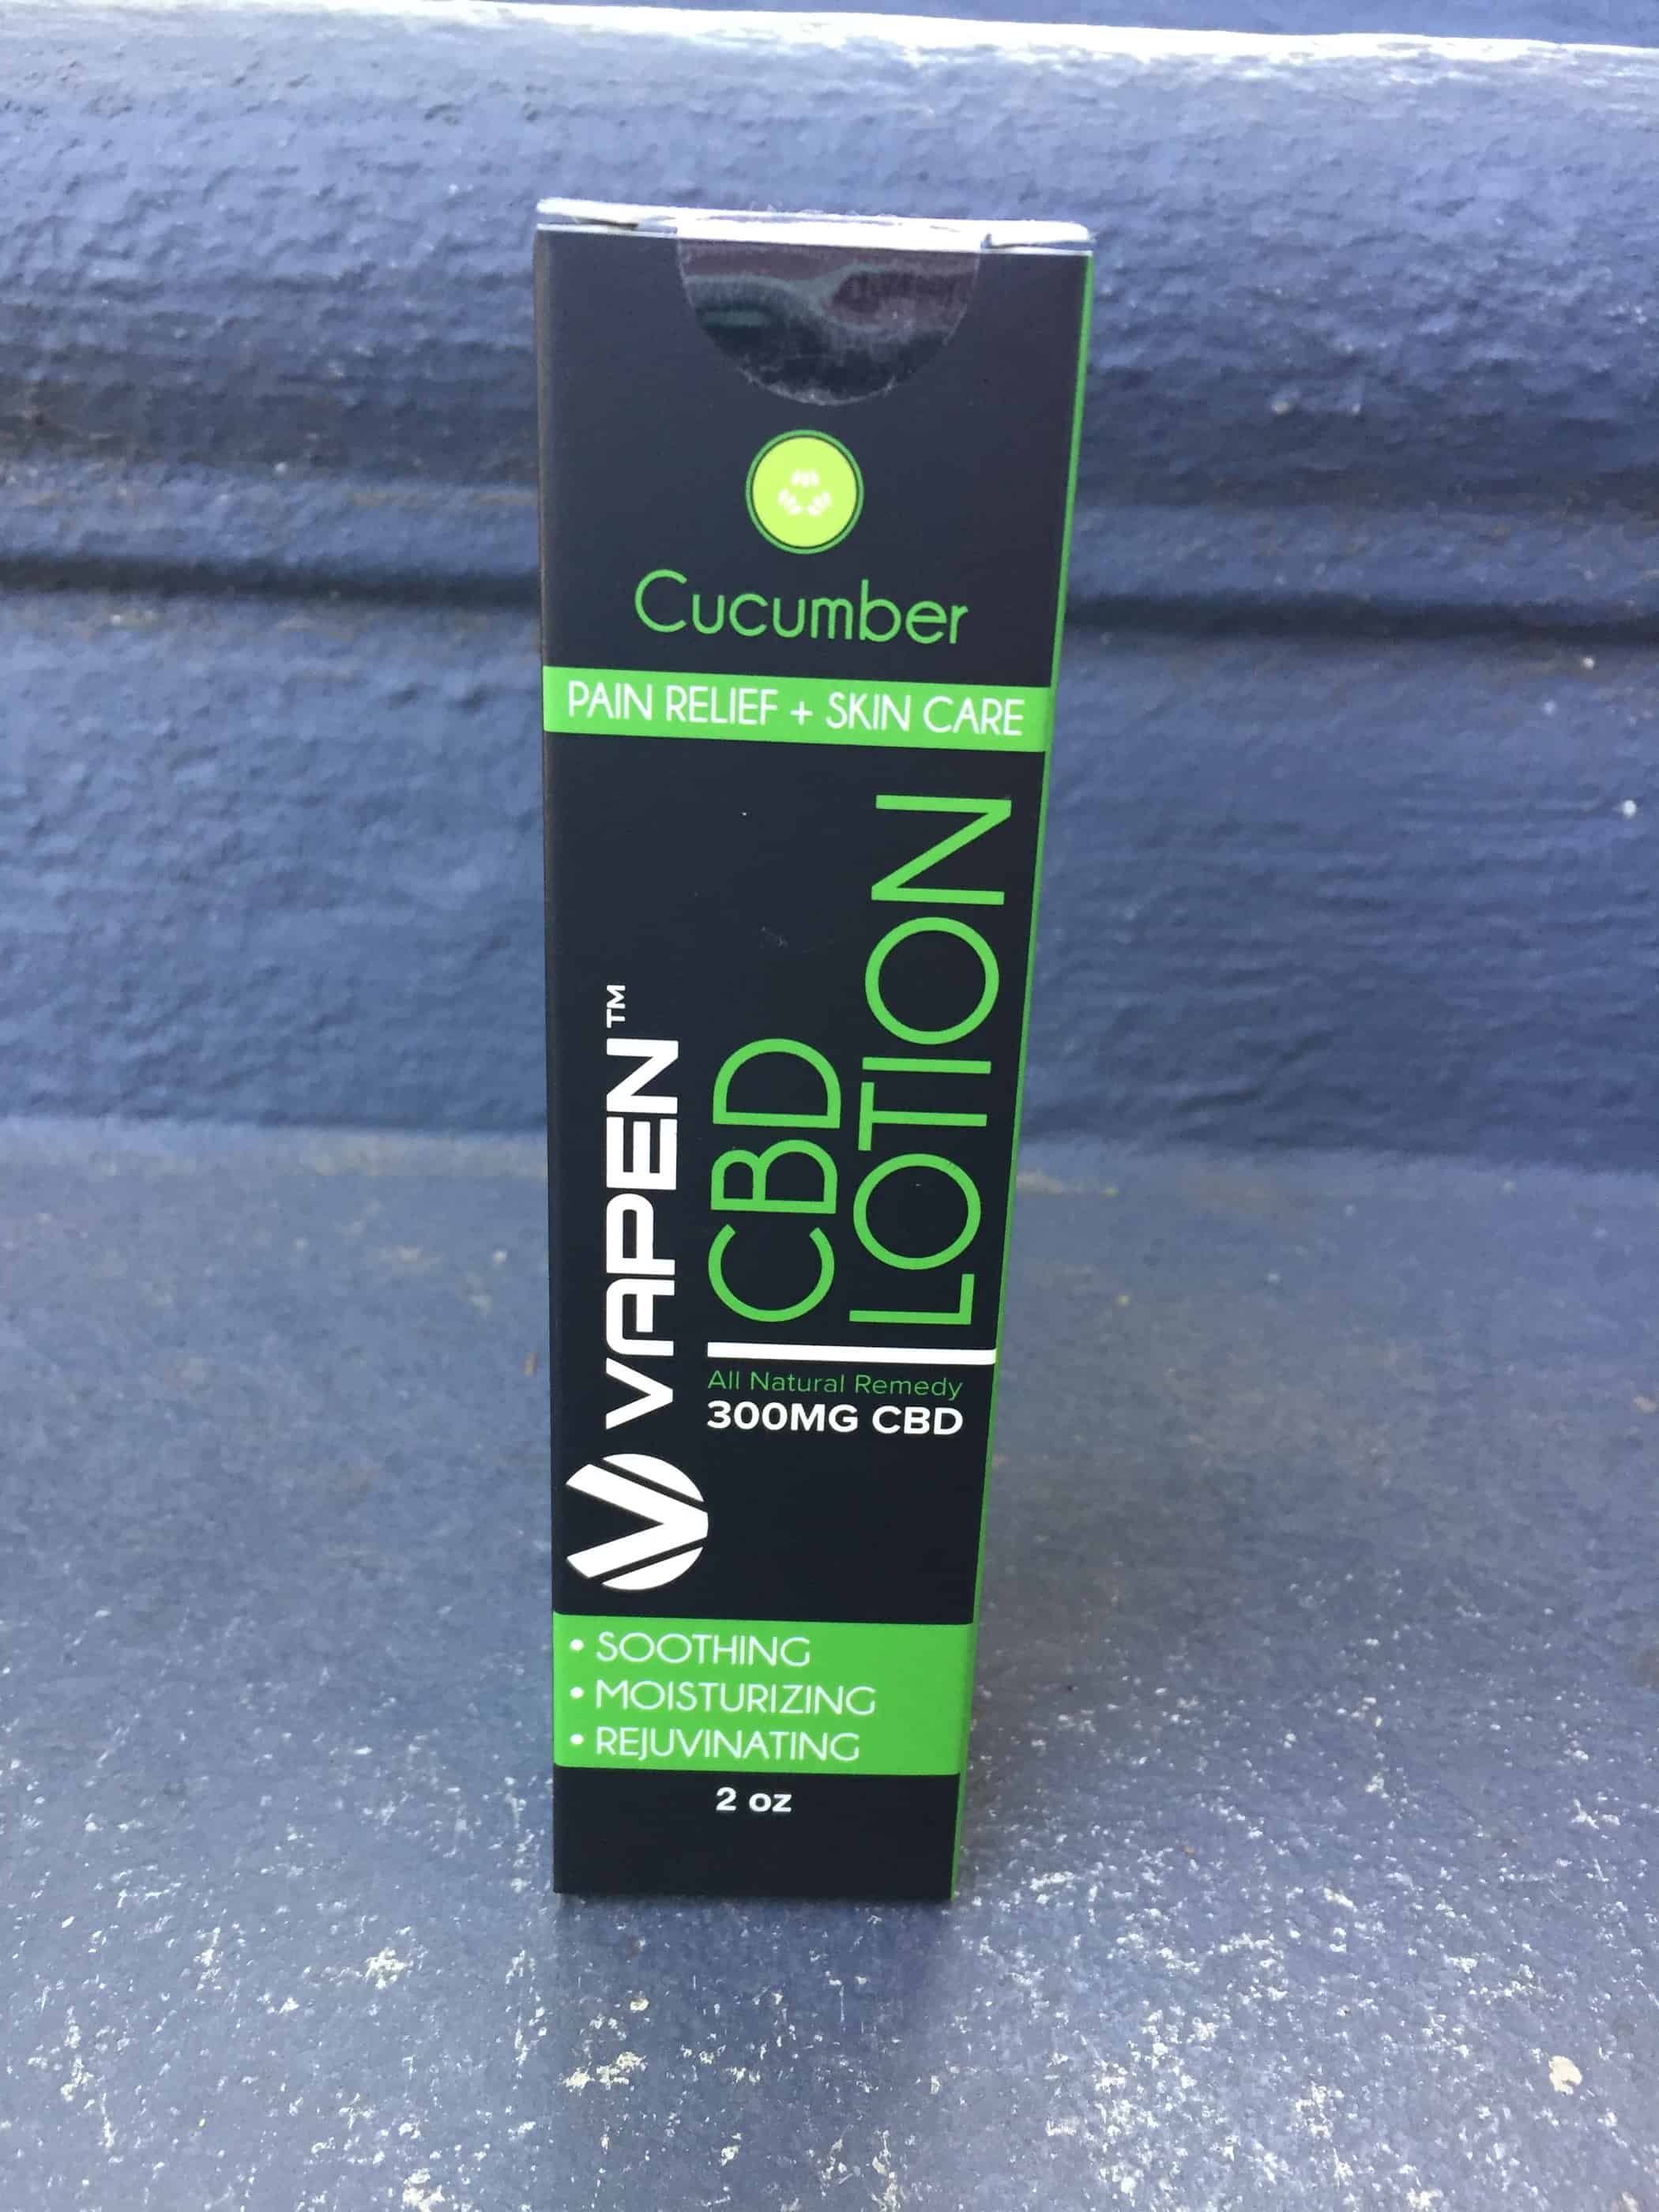 vapen cbd cucumber lotion 300 mg Save On Cannabis review